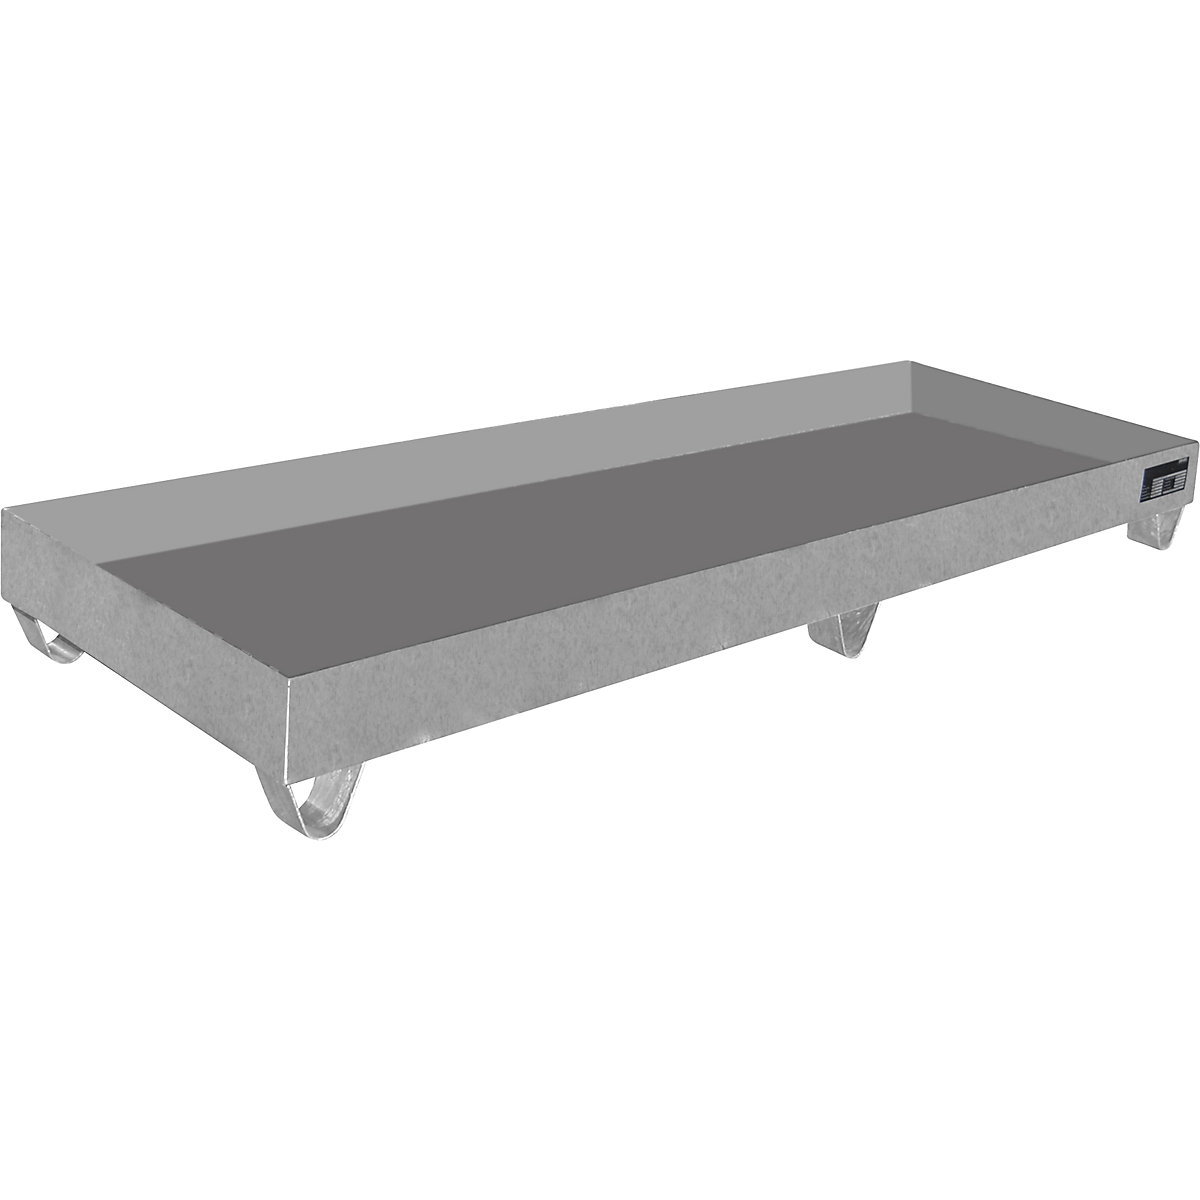 Stainless steel sump tray – eurokraft pro, for 200 l drums, 4 drums, LxWxH 2400 x 800 x 250 mm, 3+ items-2